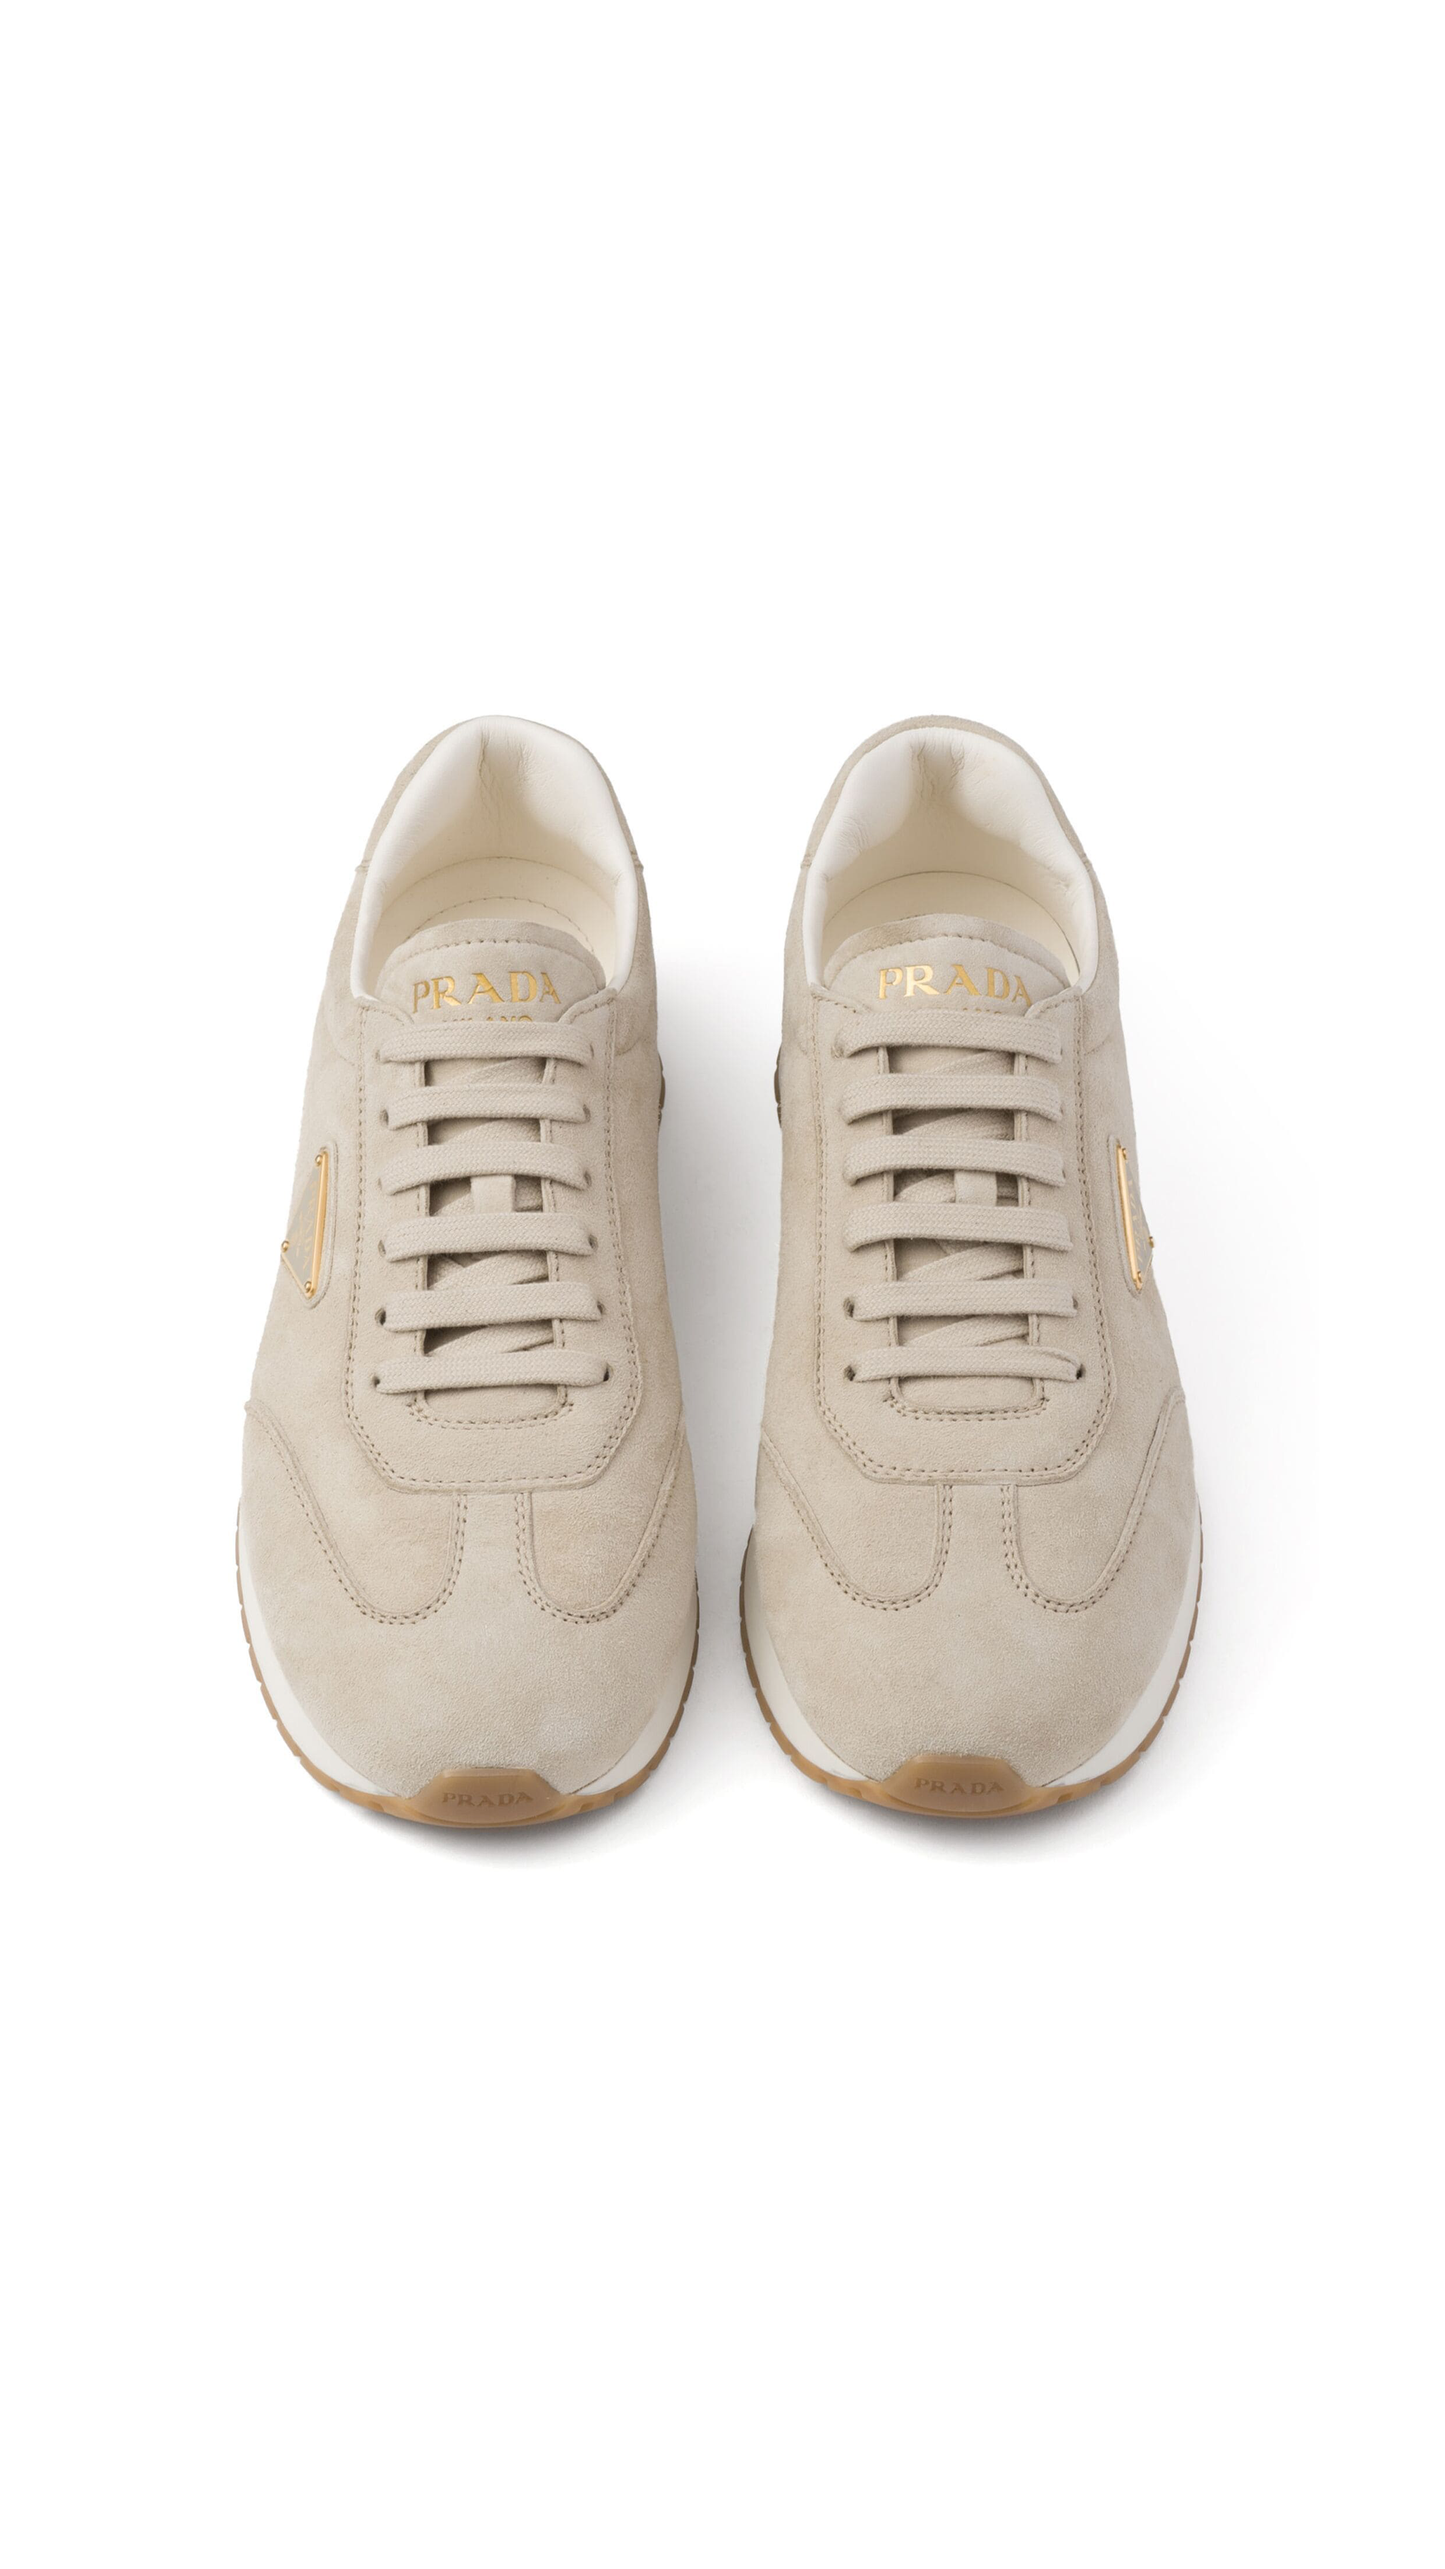 Suede Sneakers - Pumice Stone